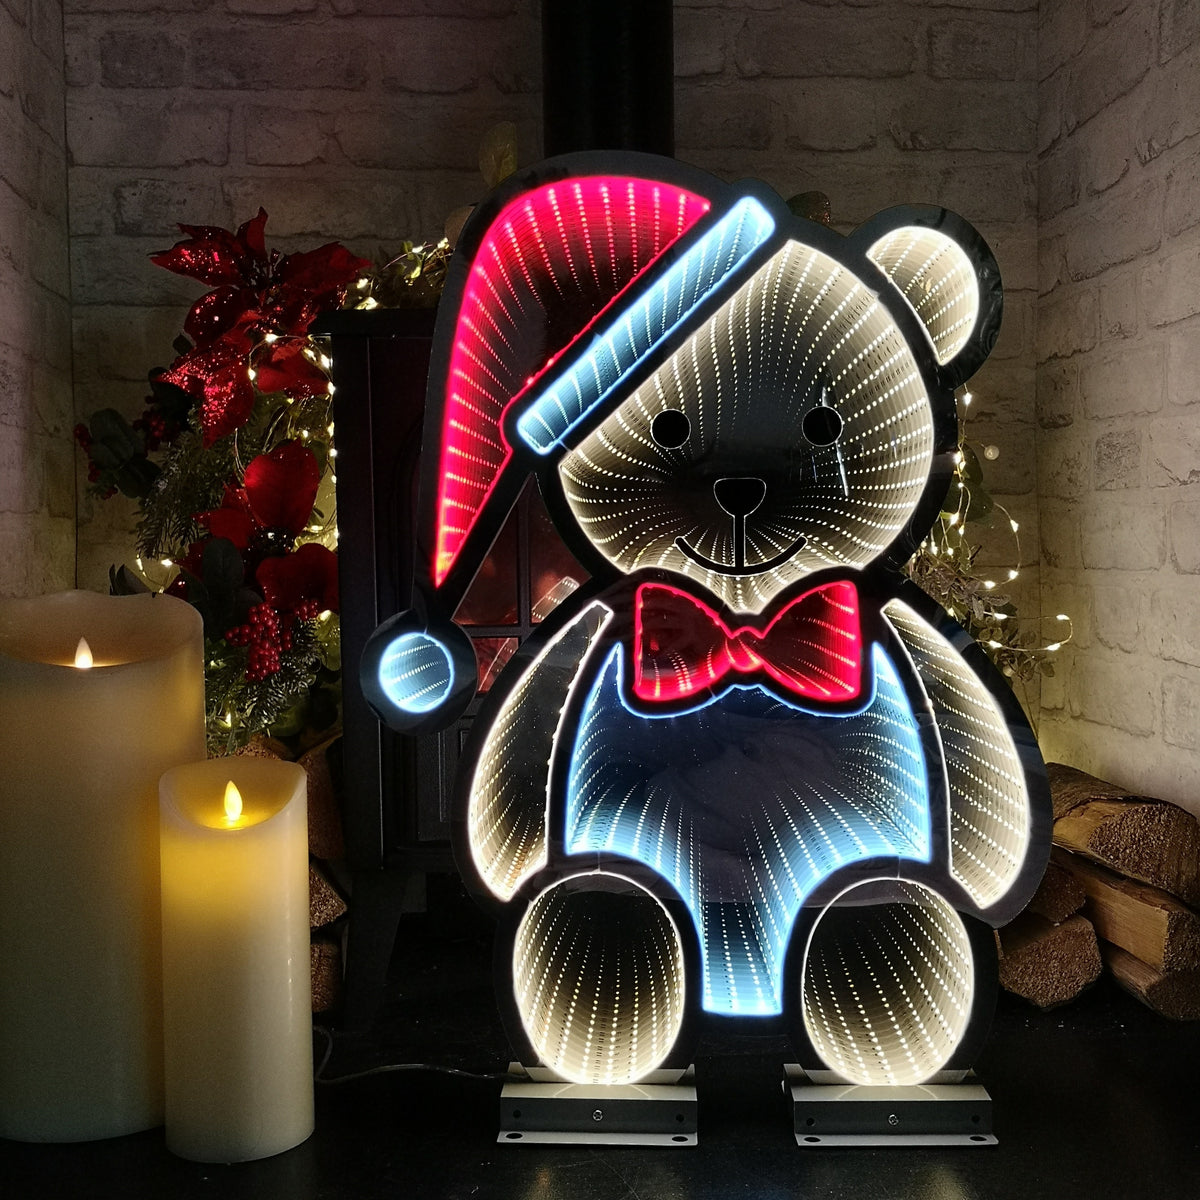 60cm LED Infinity Light Teddy with Hat & Bow-tie Decorations with Metal Stand